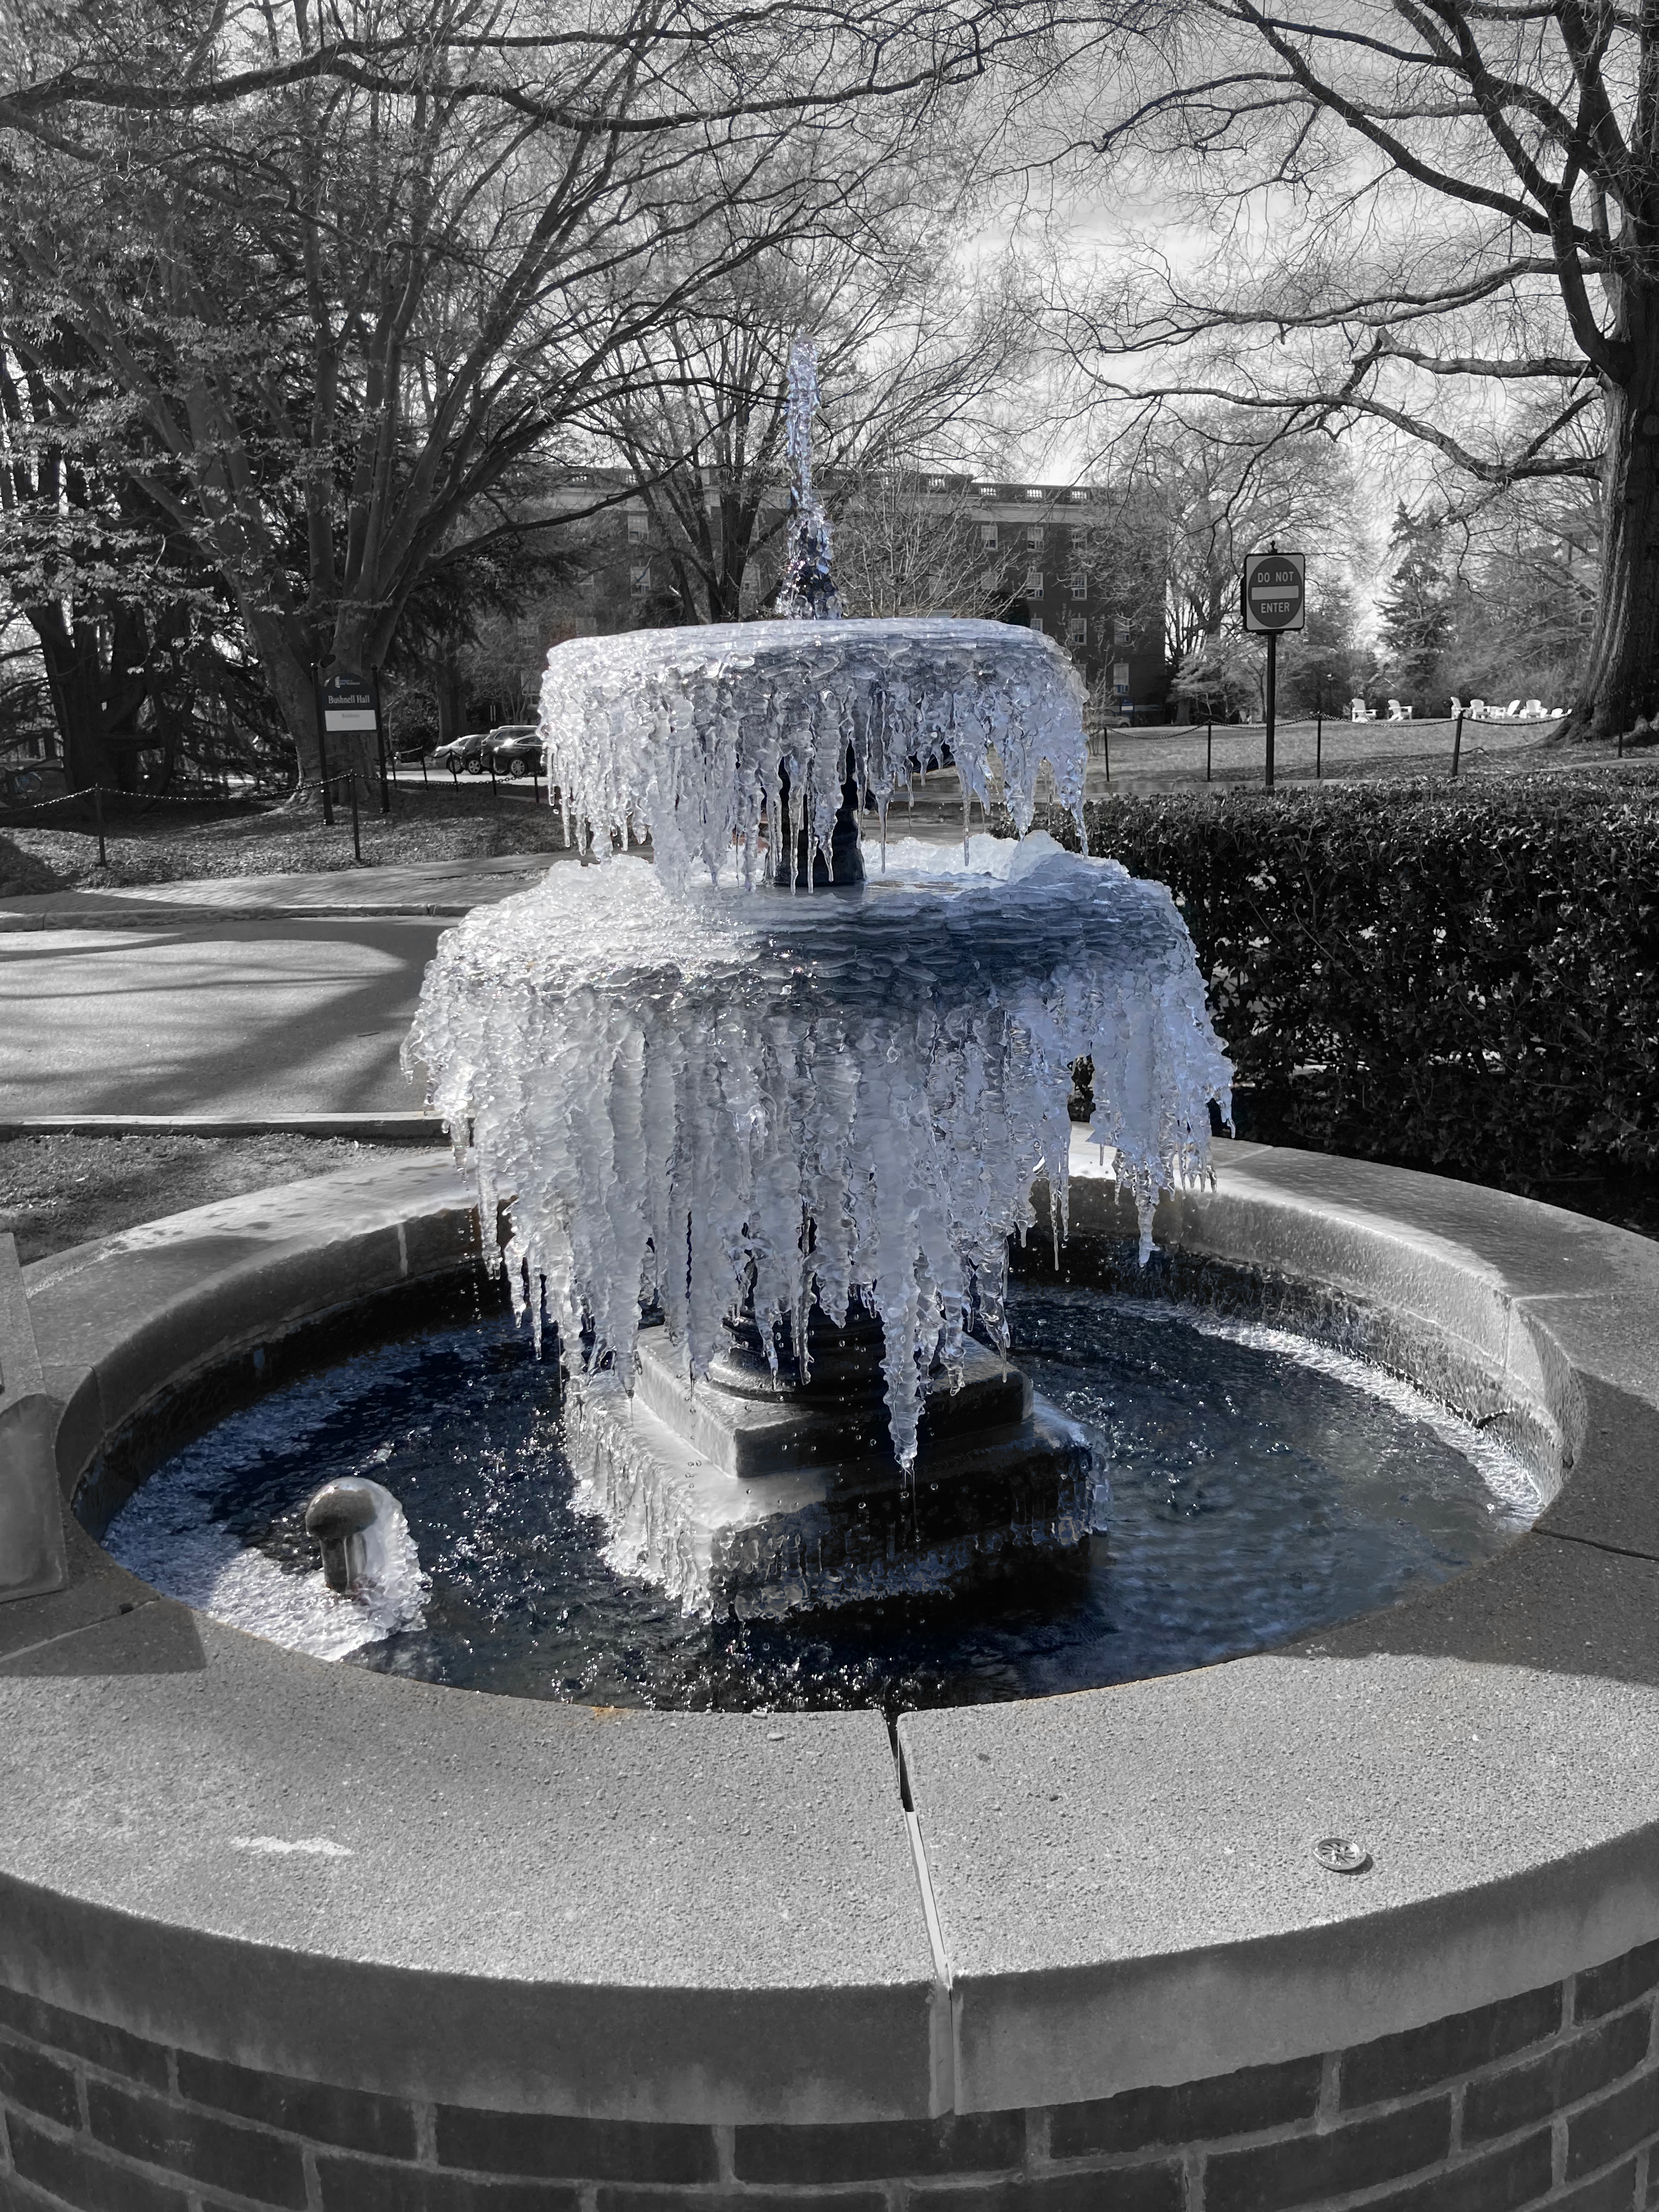 A fountain frozen over. The background has been drained of color